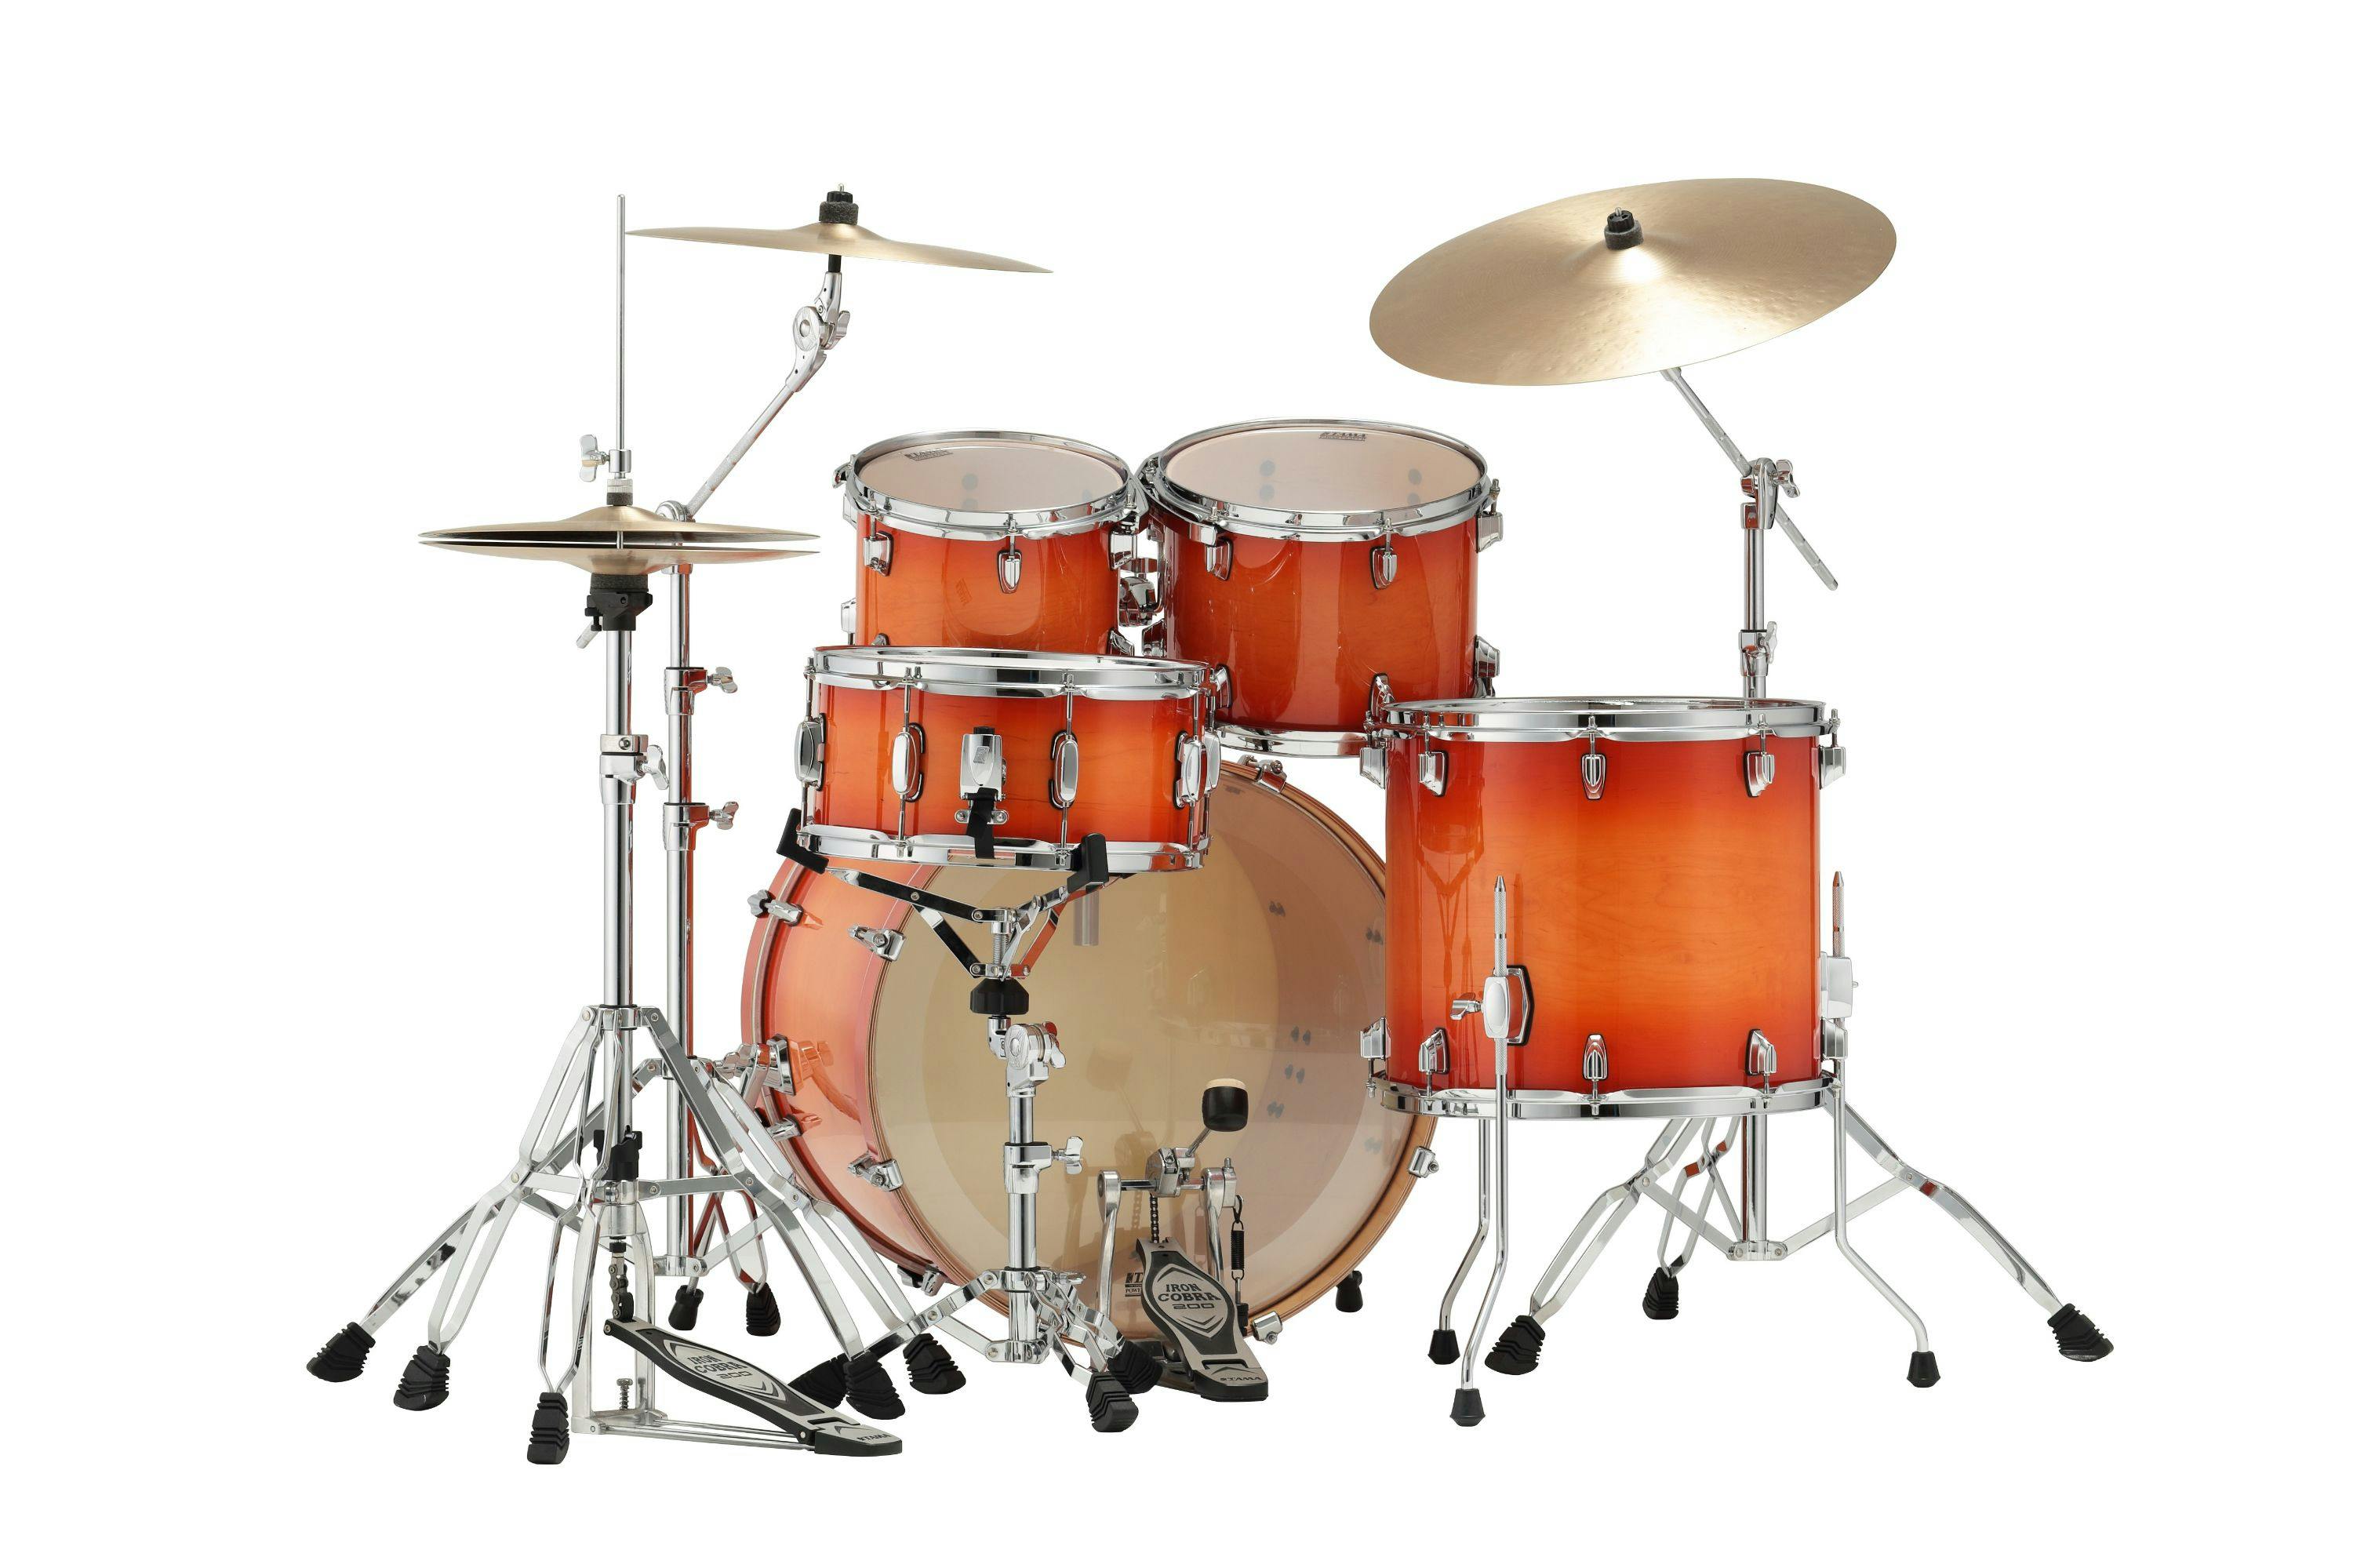 Tama Superstar Classic Maple 5pc Shell Pack in Tangerine Lacquer Burst -  Andertons Music Co.